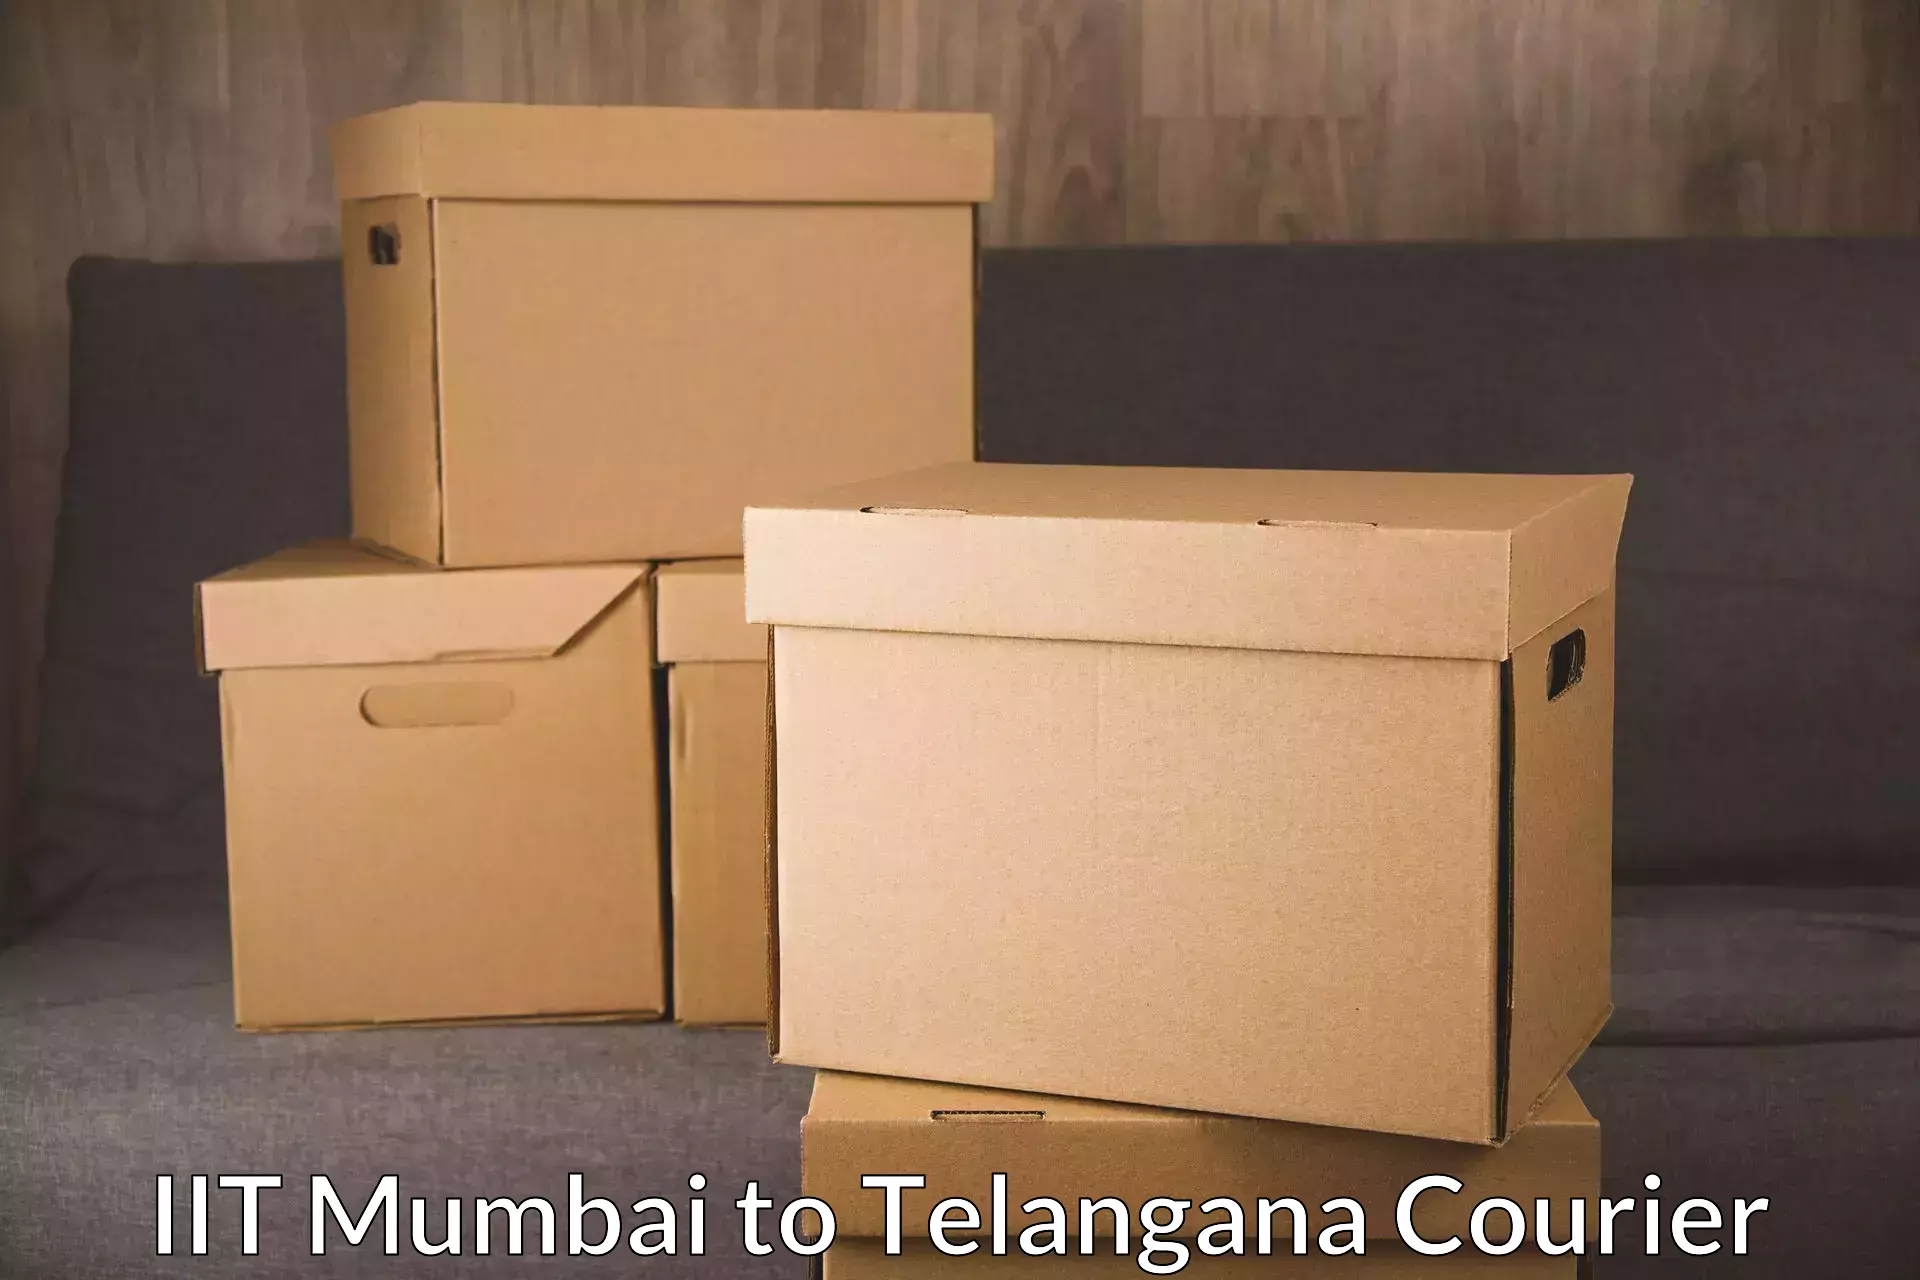 State-of-the-art courier technology IIT Mumbai to Allapalli